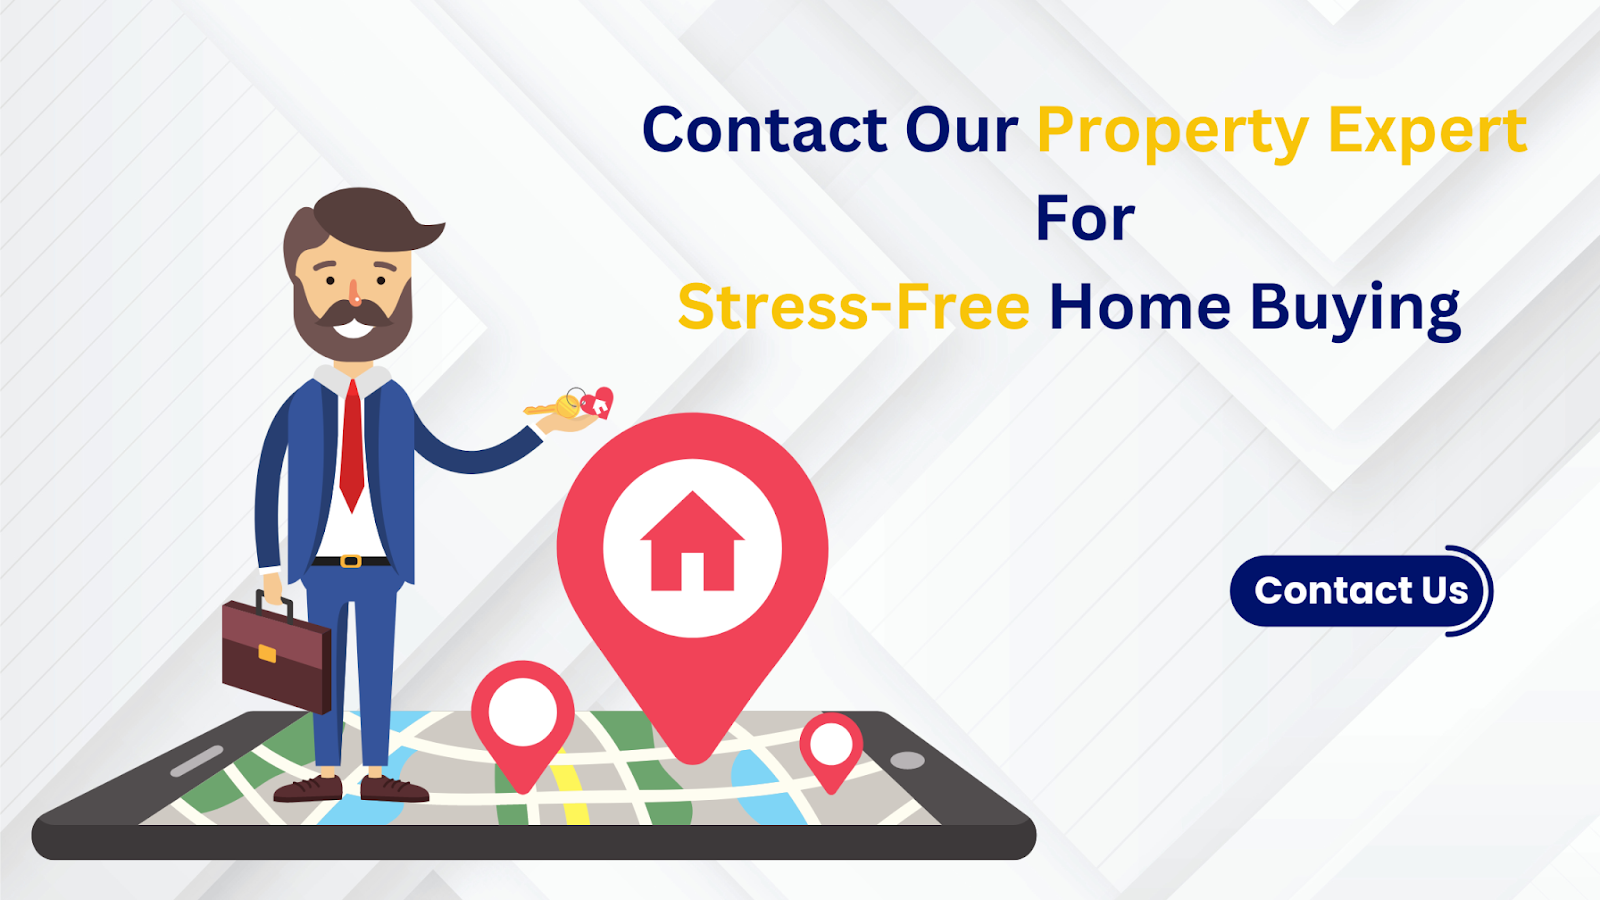 Contact our Property Expert for Stress-Free Home Buying